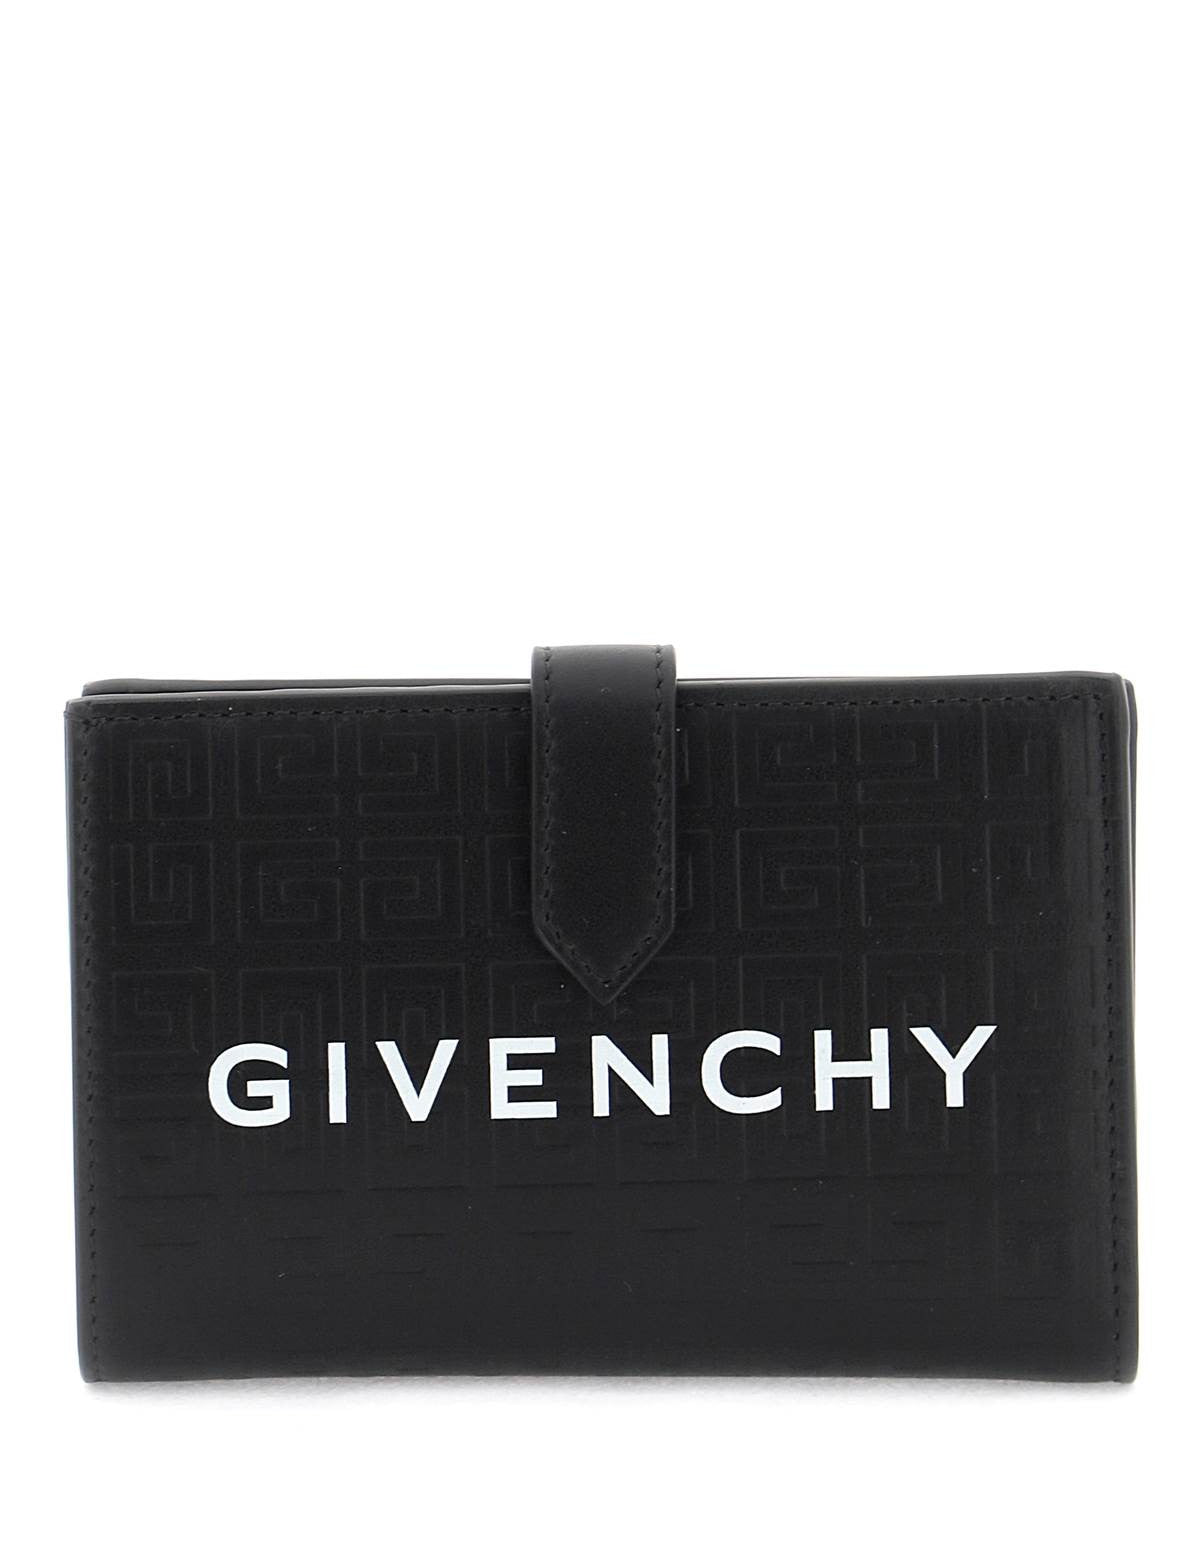 givenchy-4g-leather-g-cut-wallet.jpg